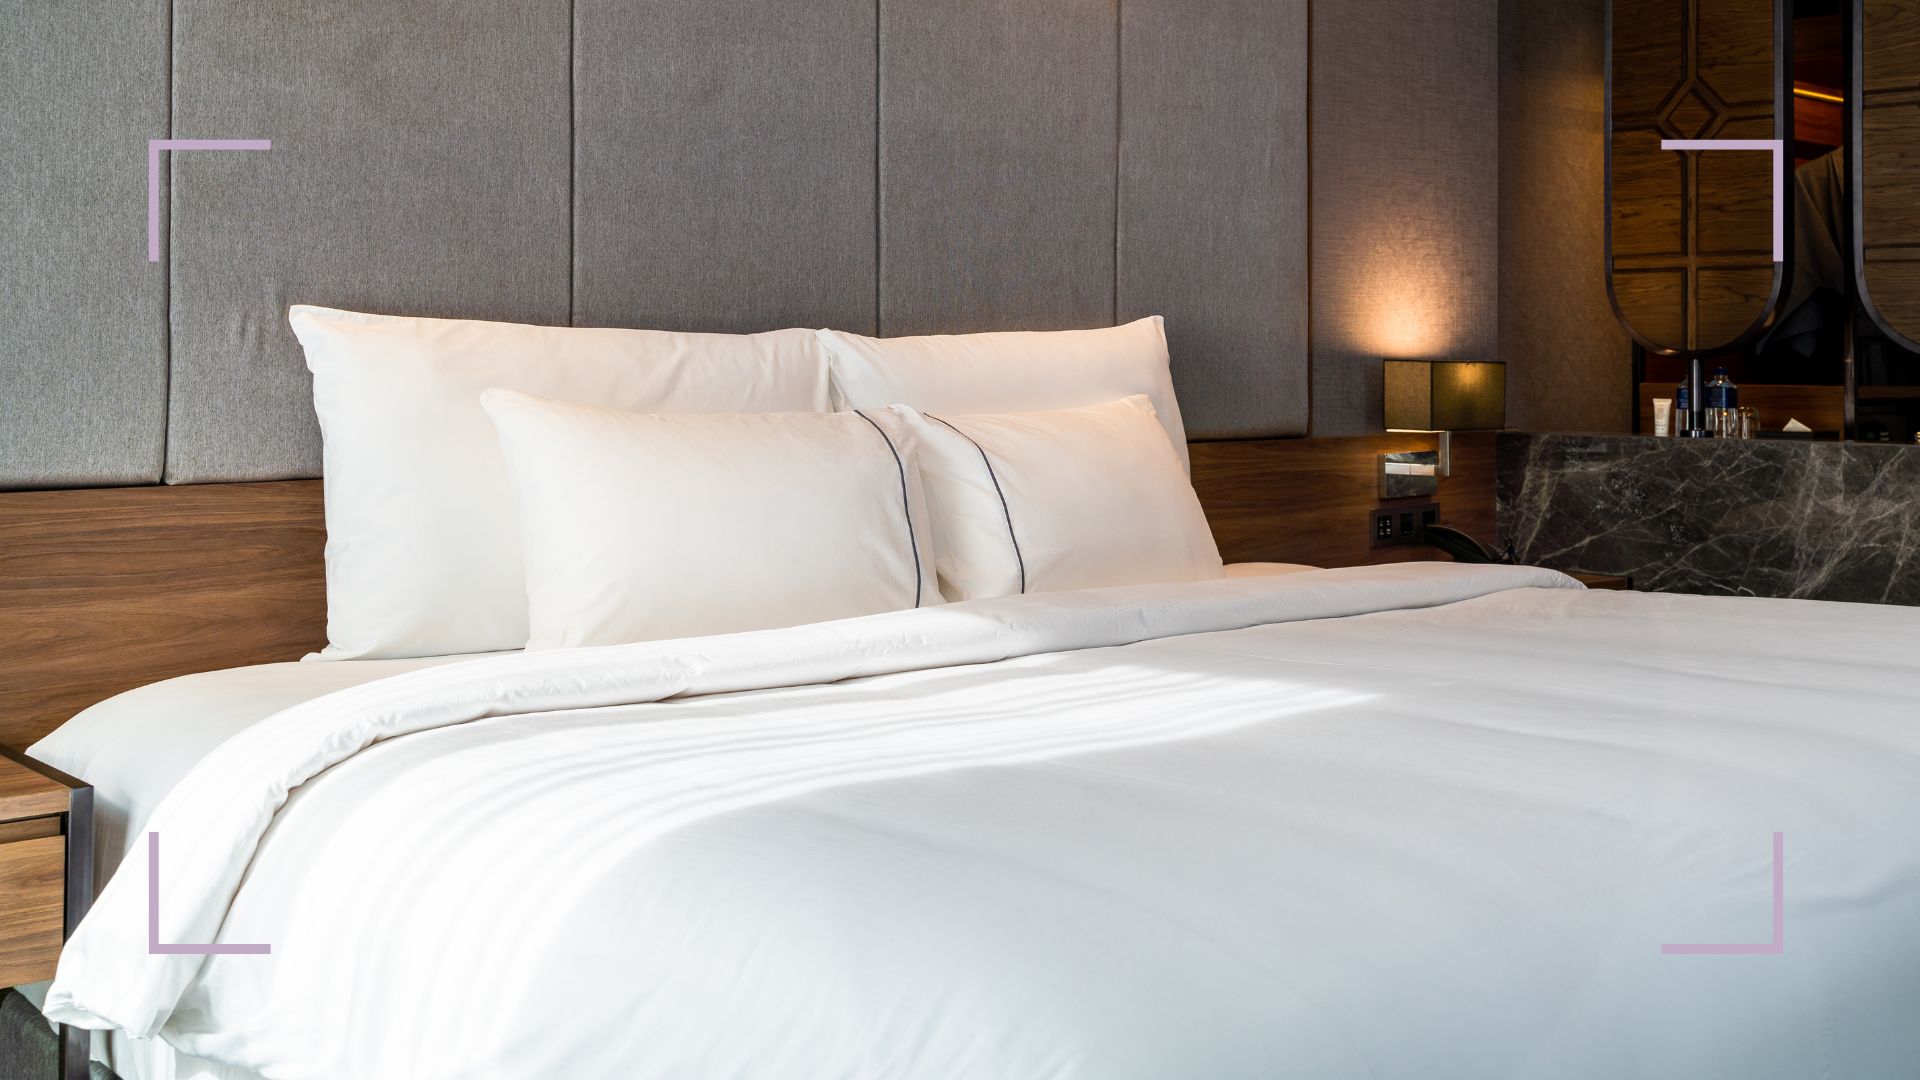 Pillow talk is big business for hotels